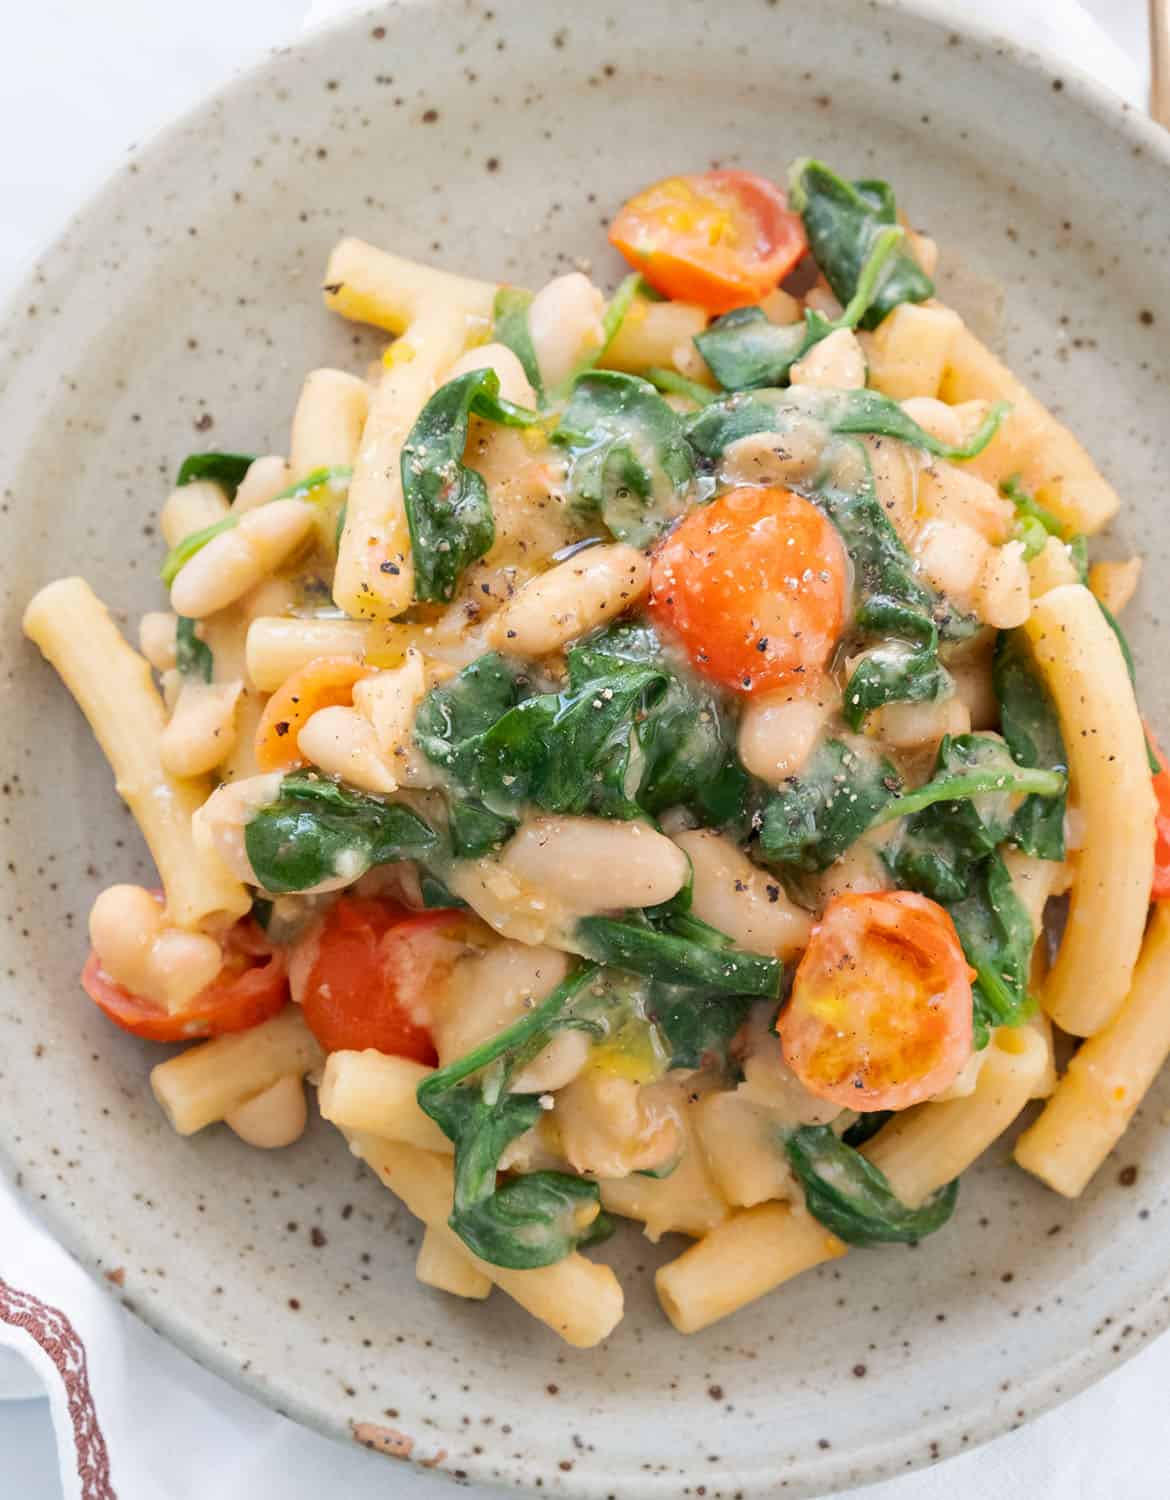 Top view of a grey plate full of pasta with cannellini beans and spinach.